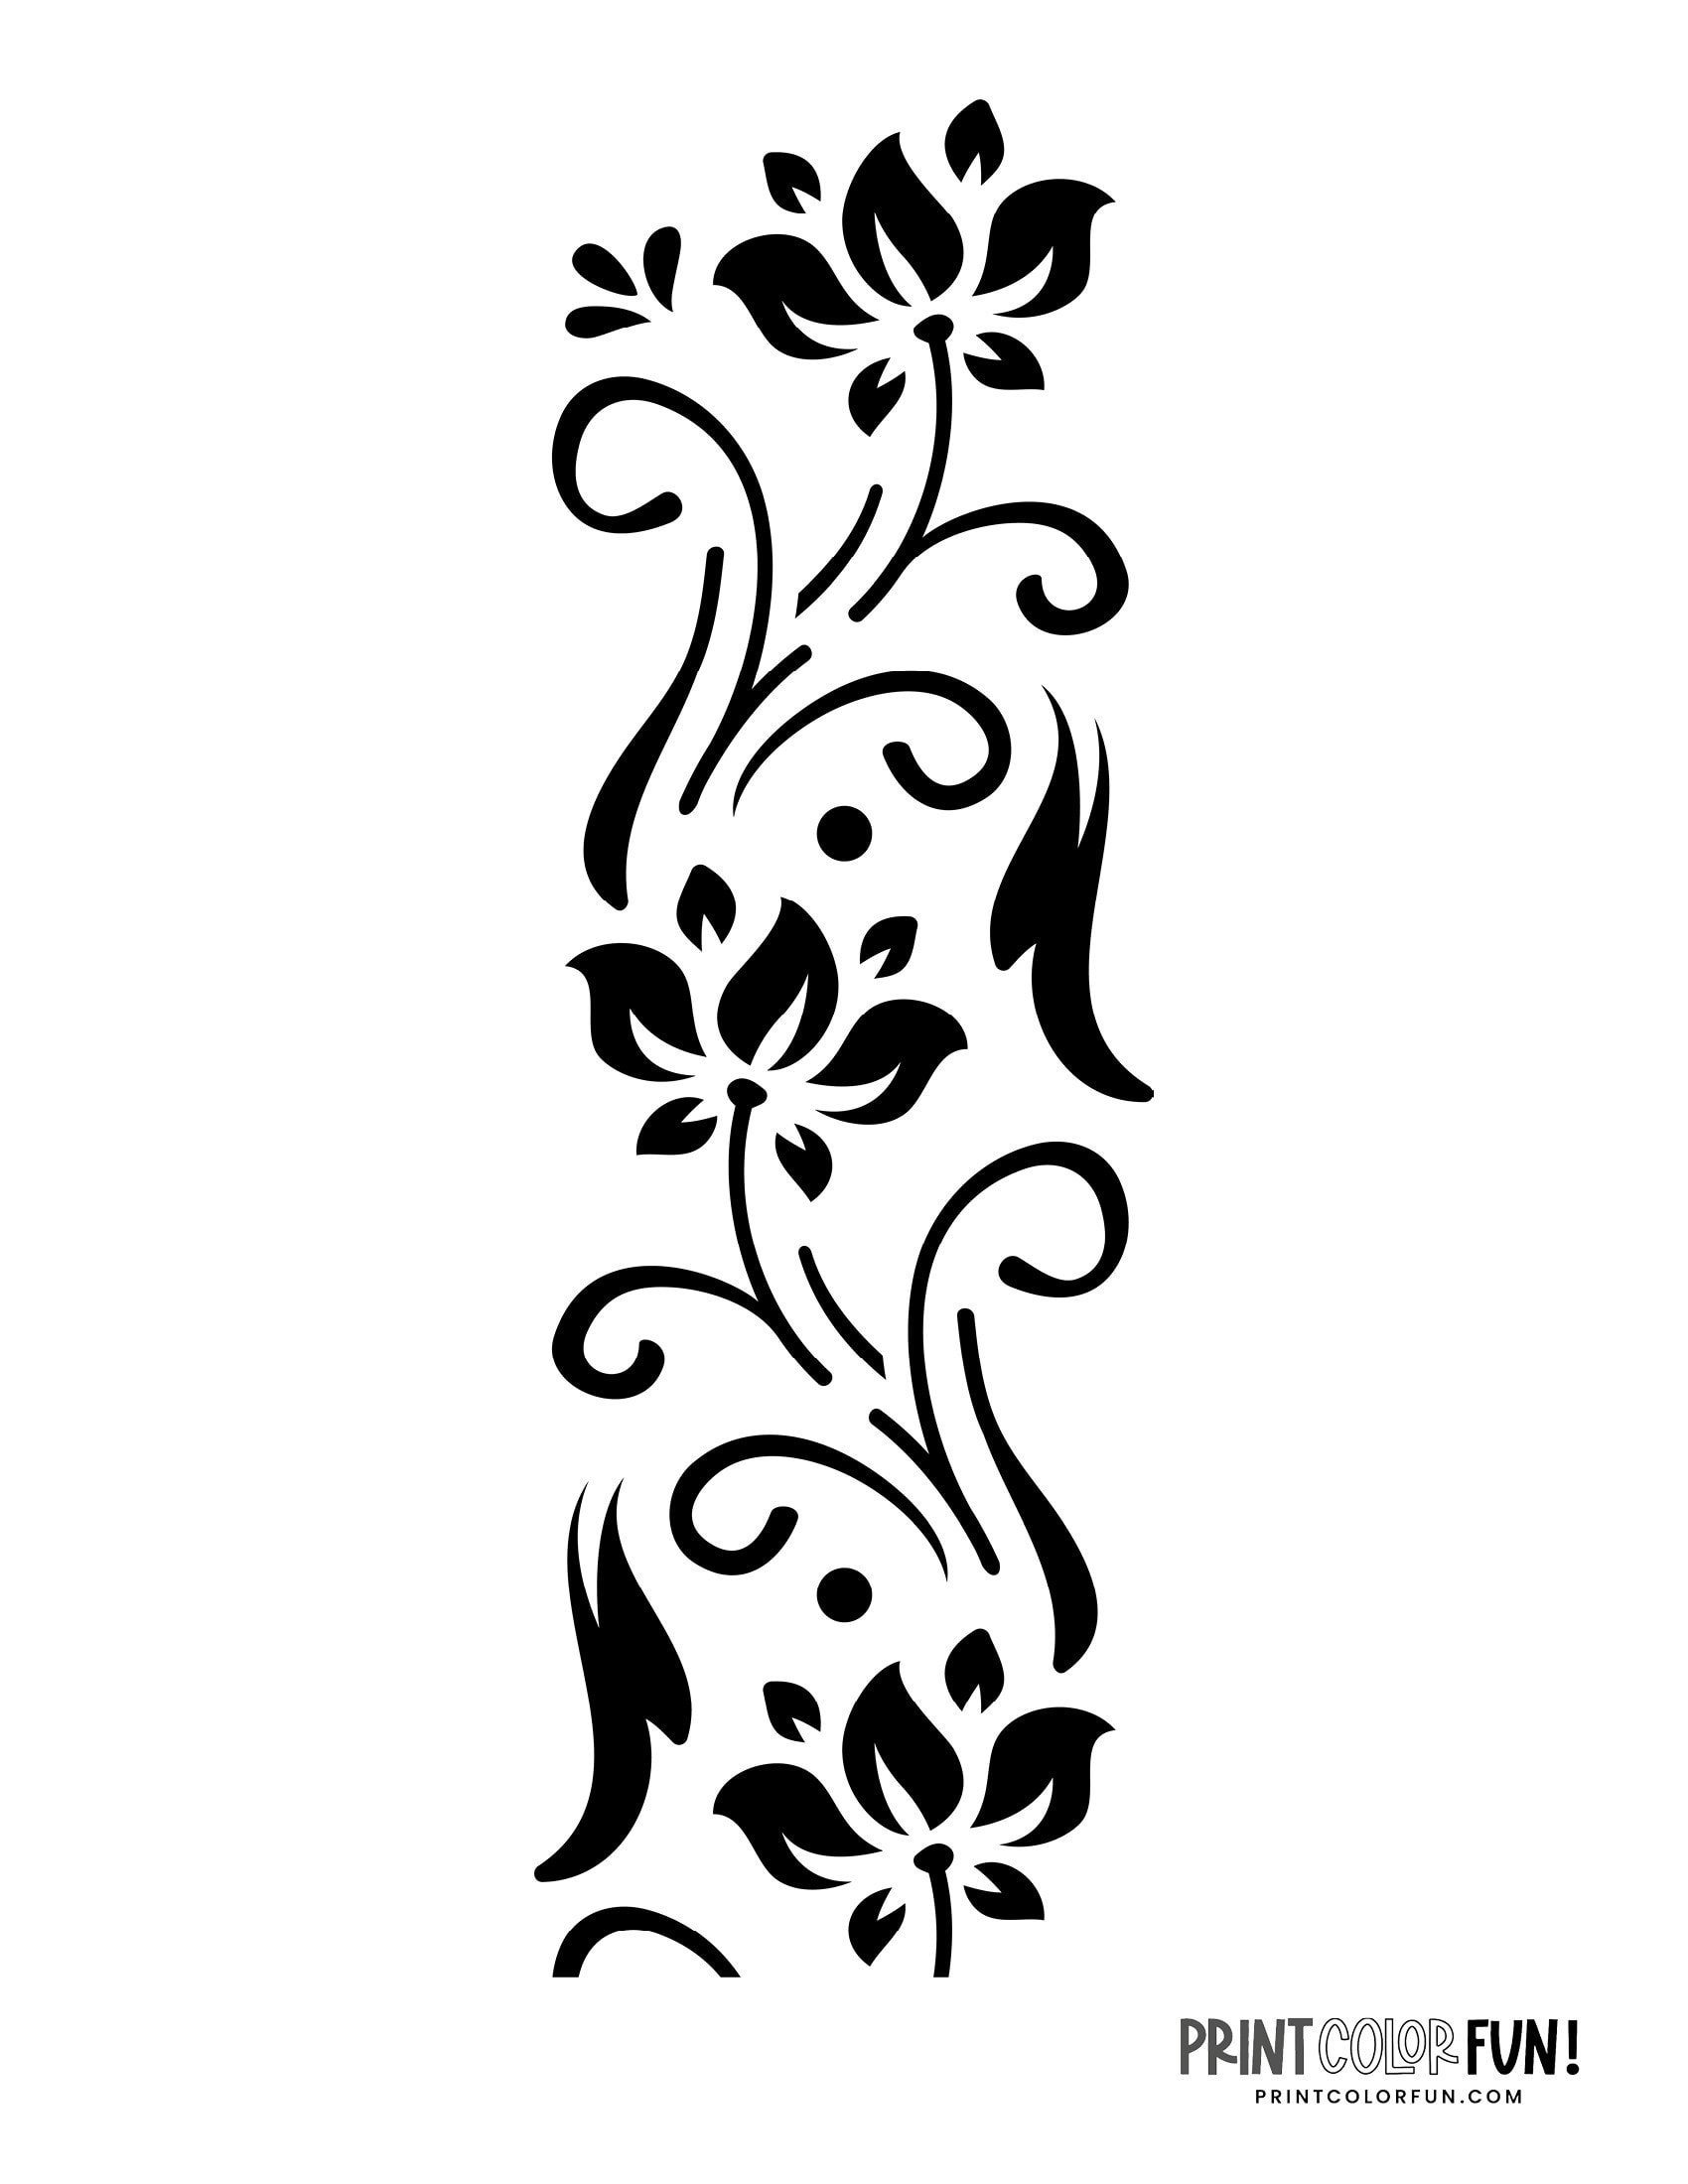 10 free flower stencil designs for printing & craft projects, at ...